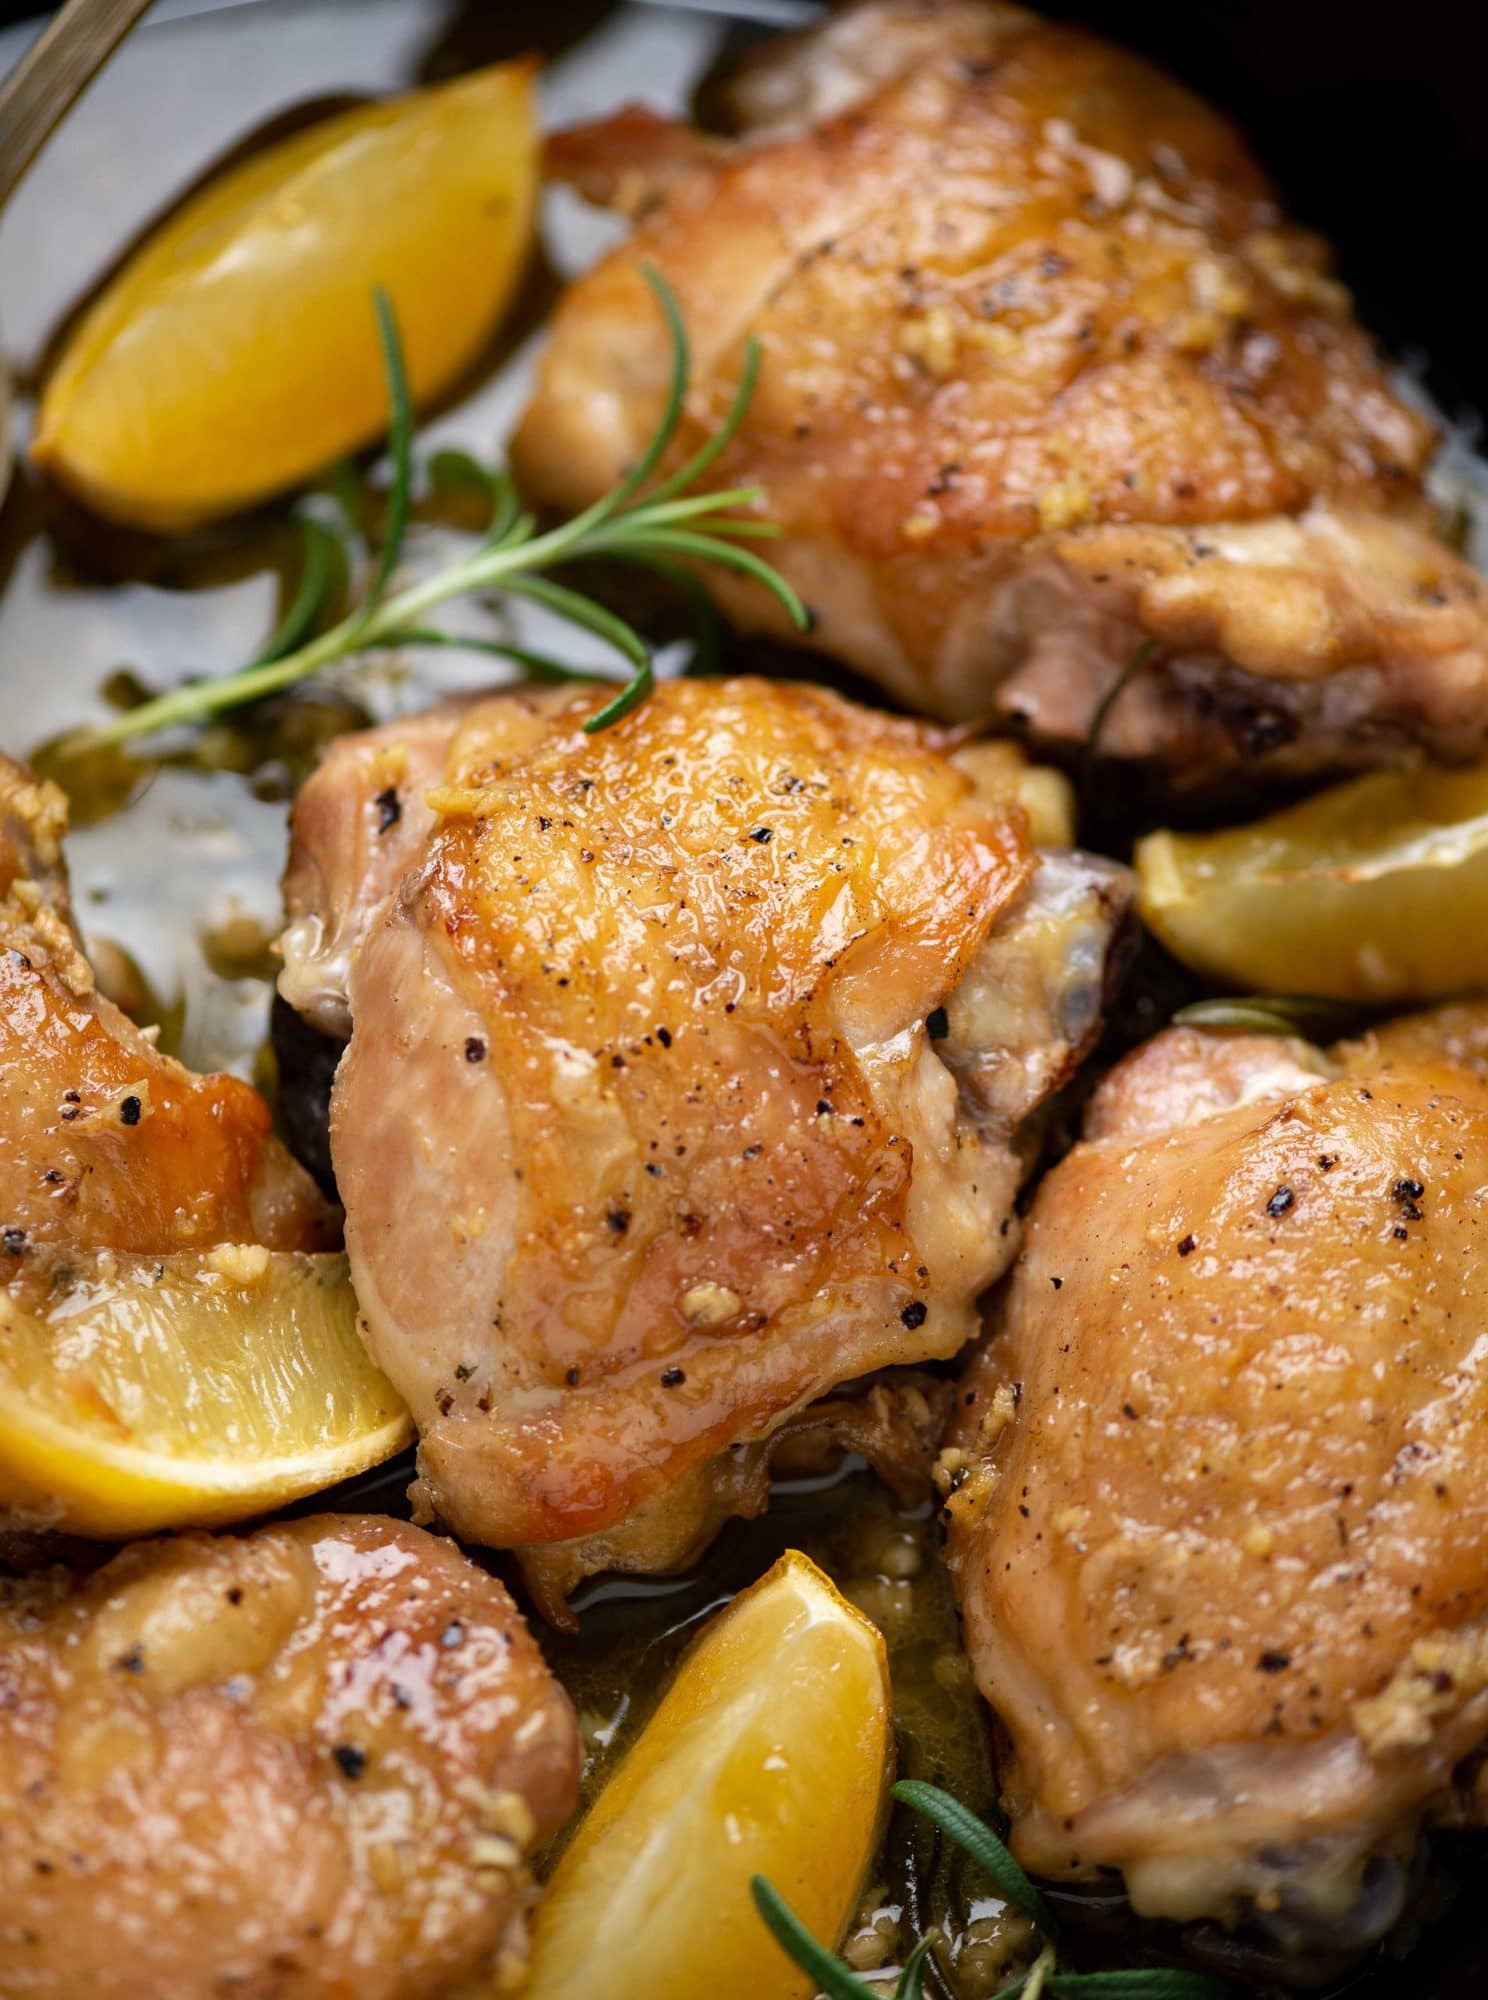 Baked chicken thighs with a crispy skin made in lemon garlic sauce and rosemary infused flavors.